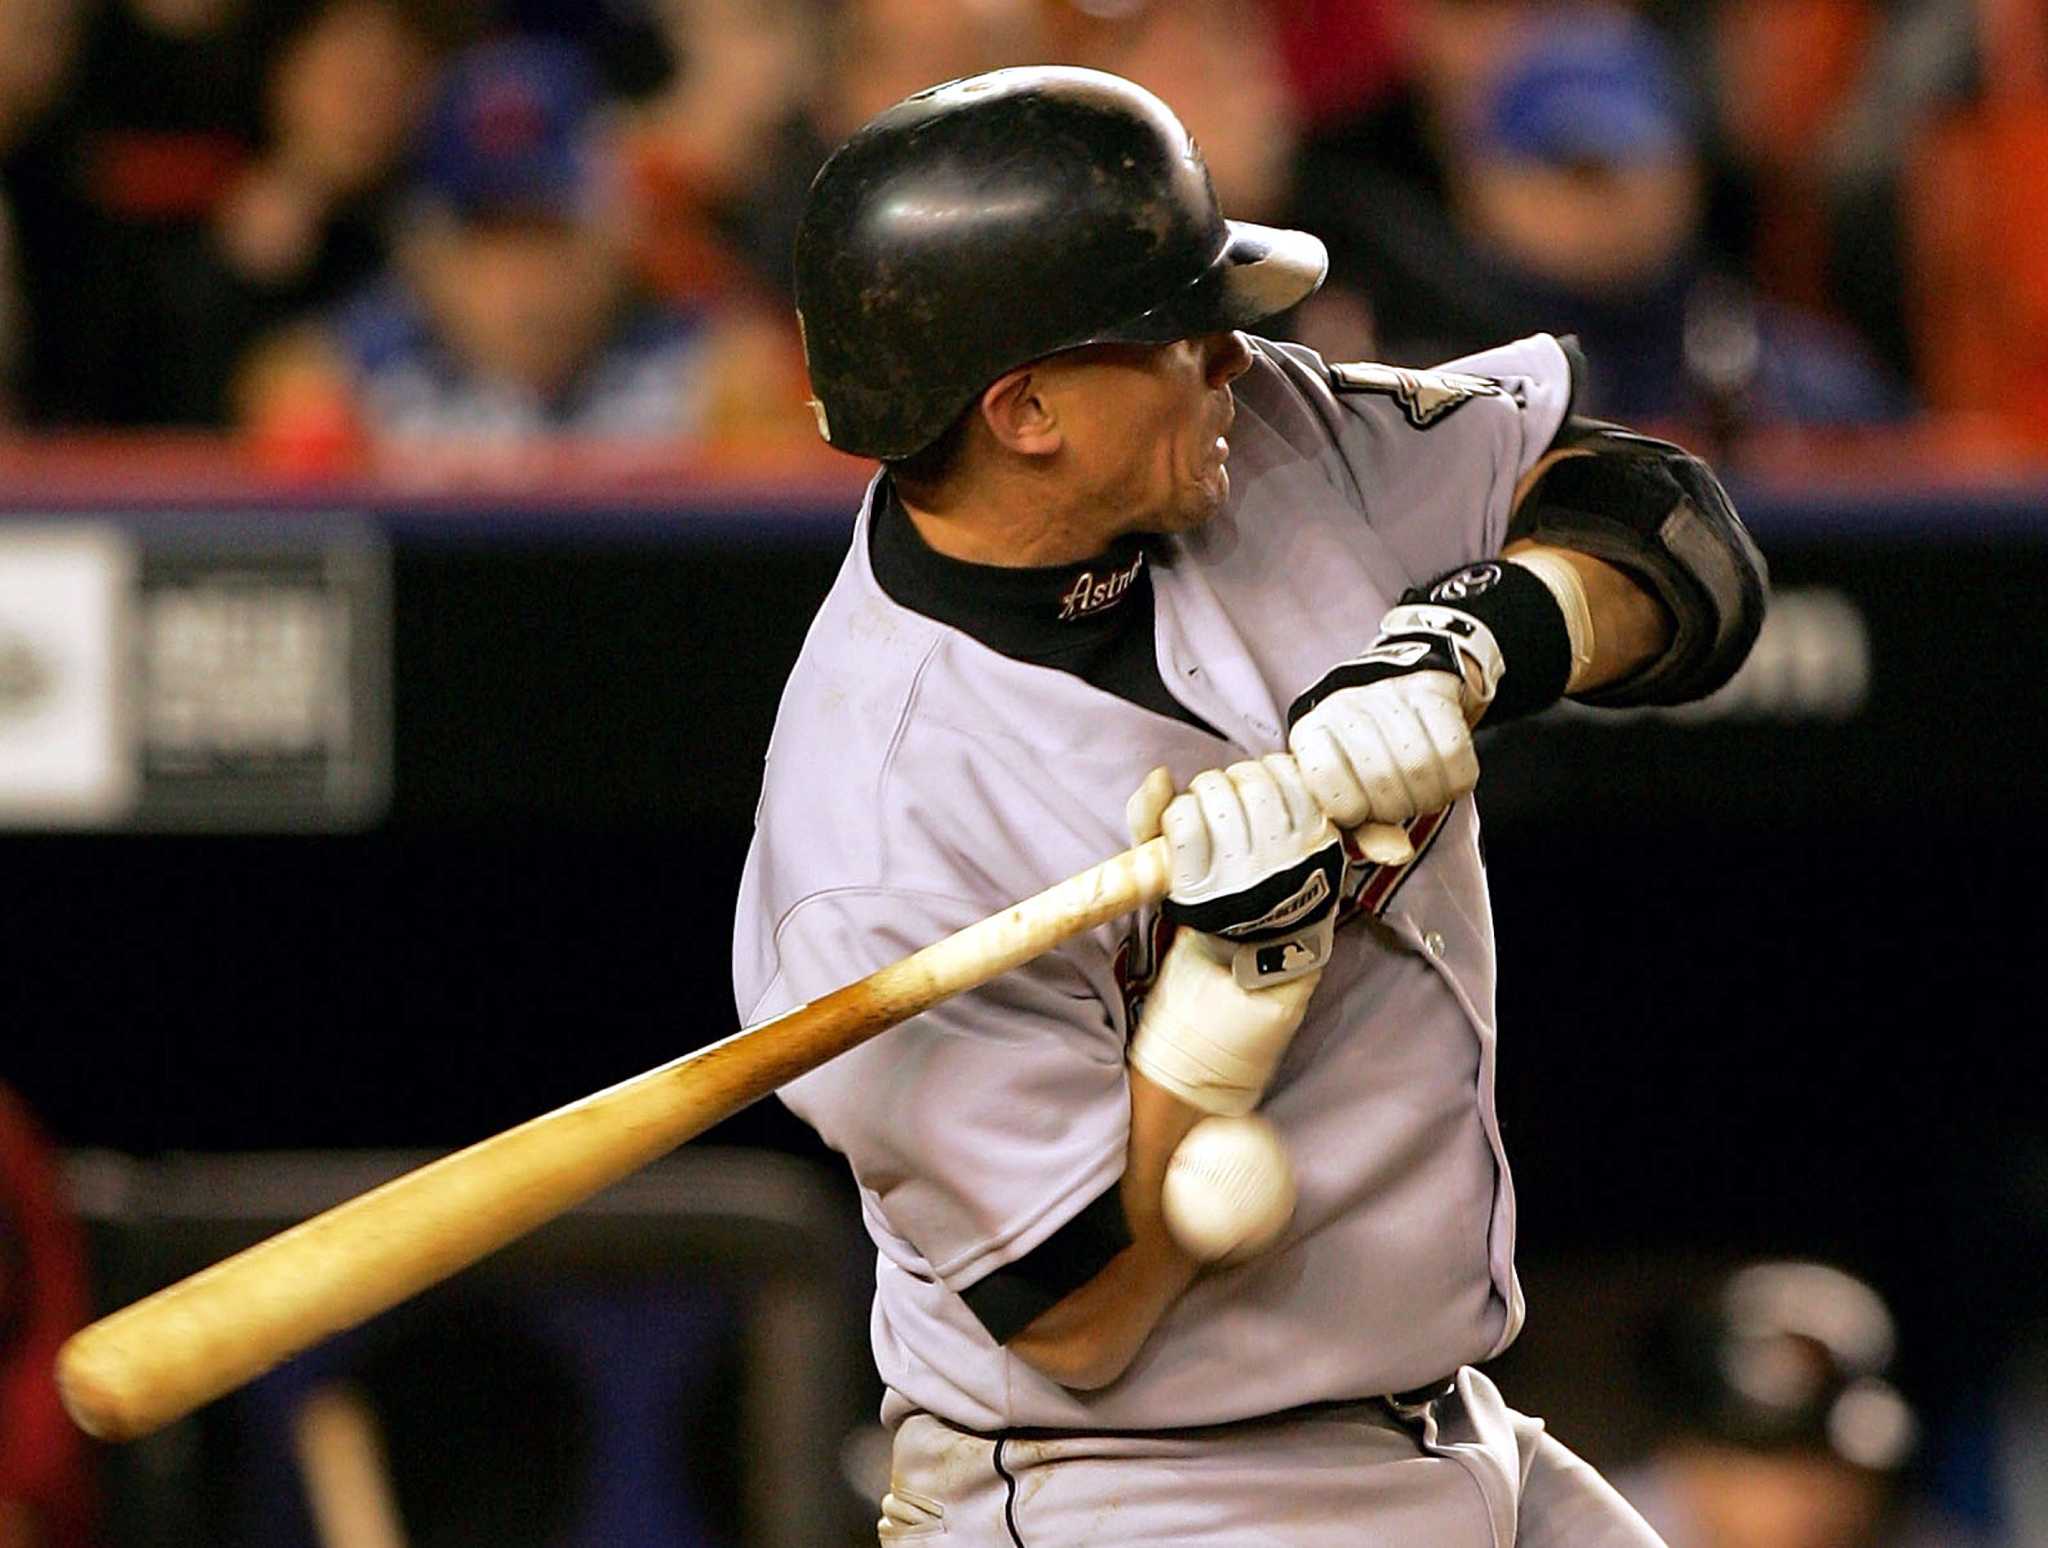 Celebrate Craig Biggio's 52th birthday by learning more about the Astros  legend